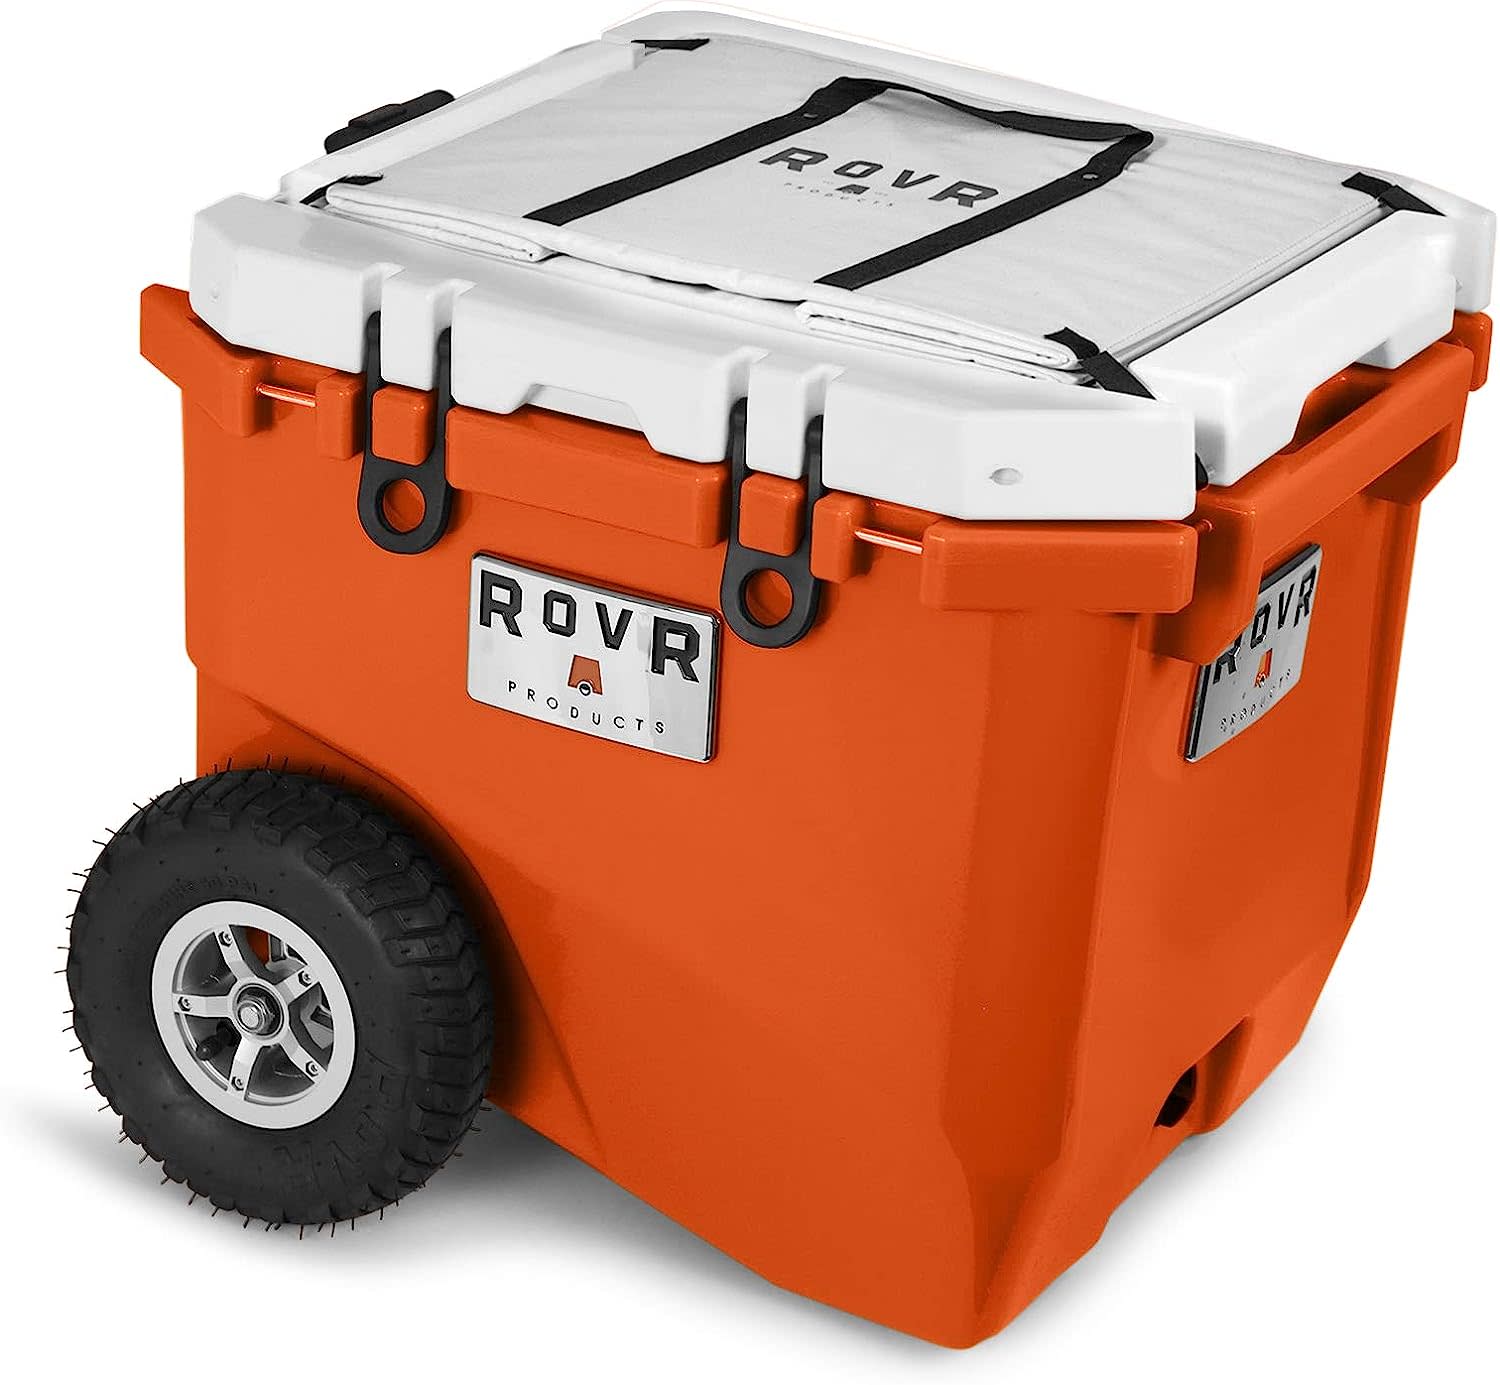 https://cdn.apartmenttherapy.info/image/upload/v1688593573/commerce/RovR-Products-RollR-45-Wheeled-Cooler-amazon.jpg